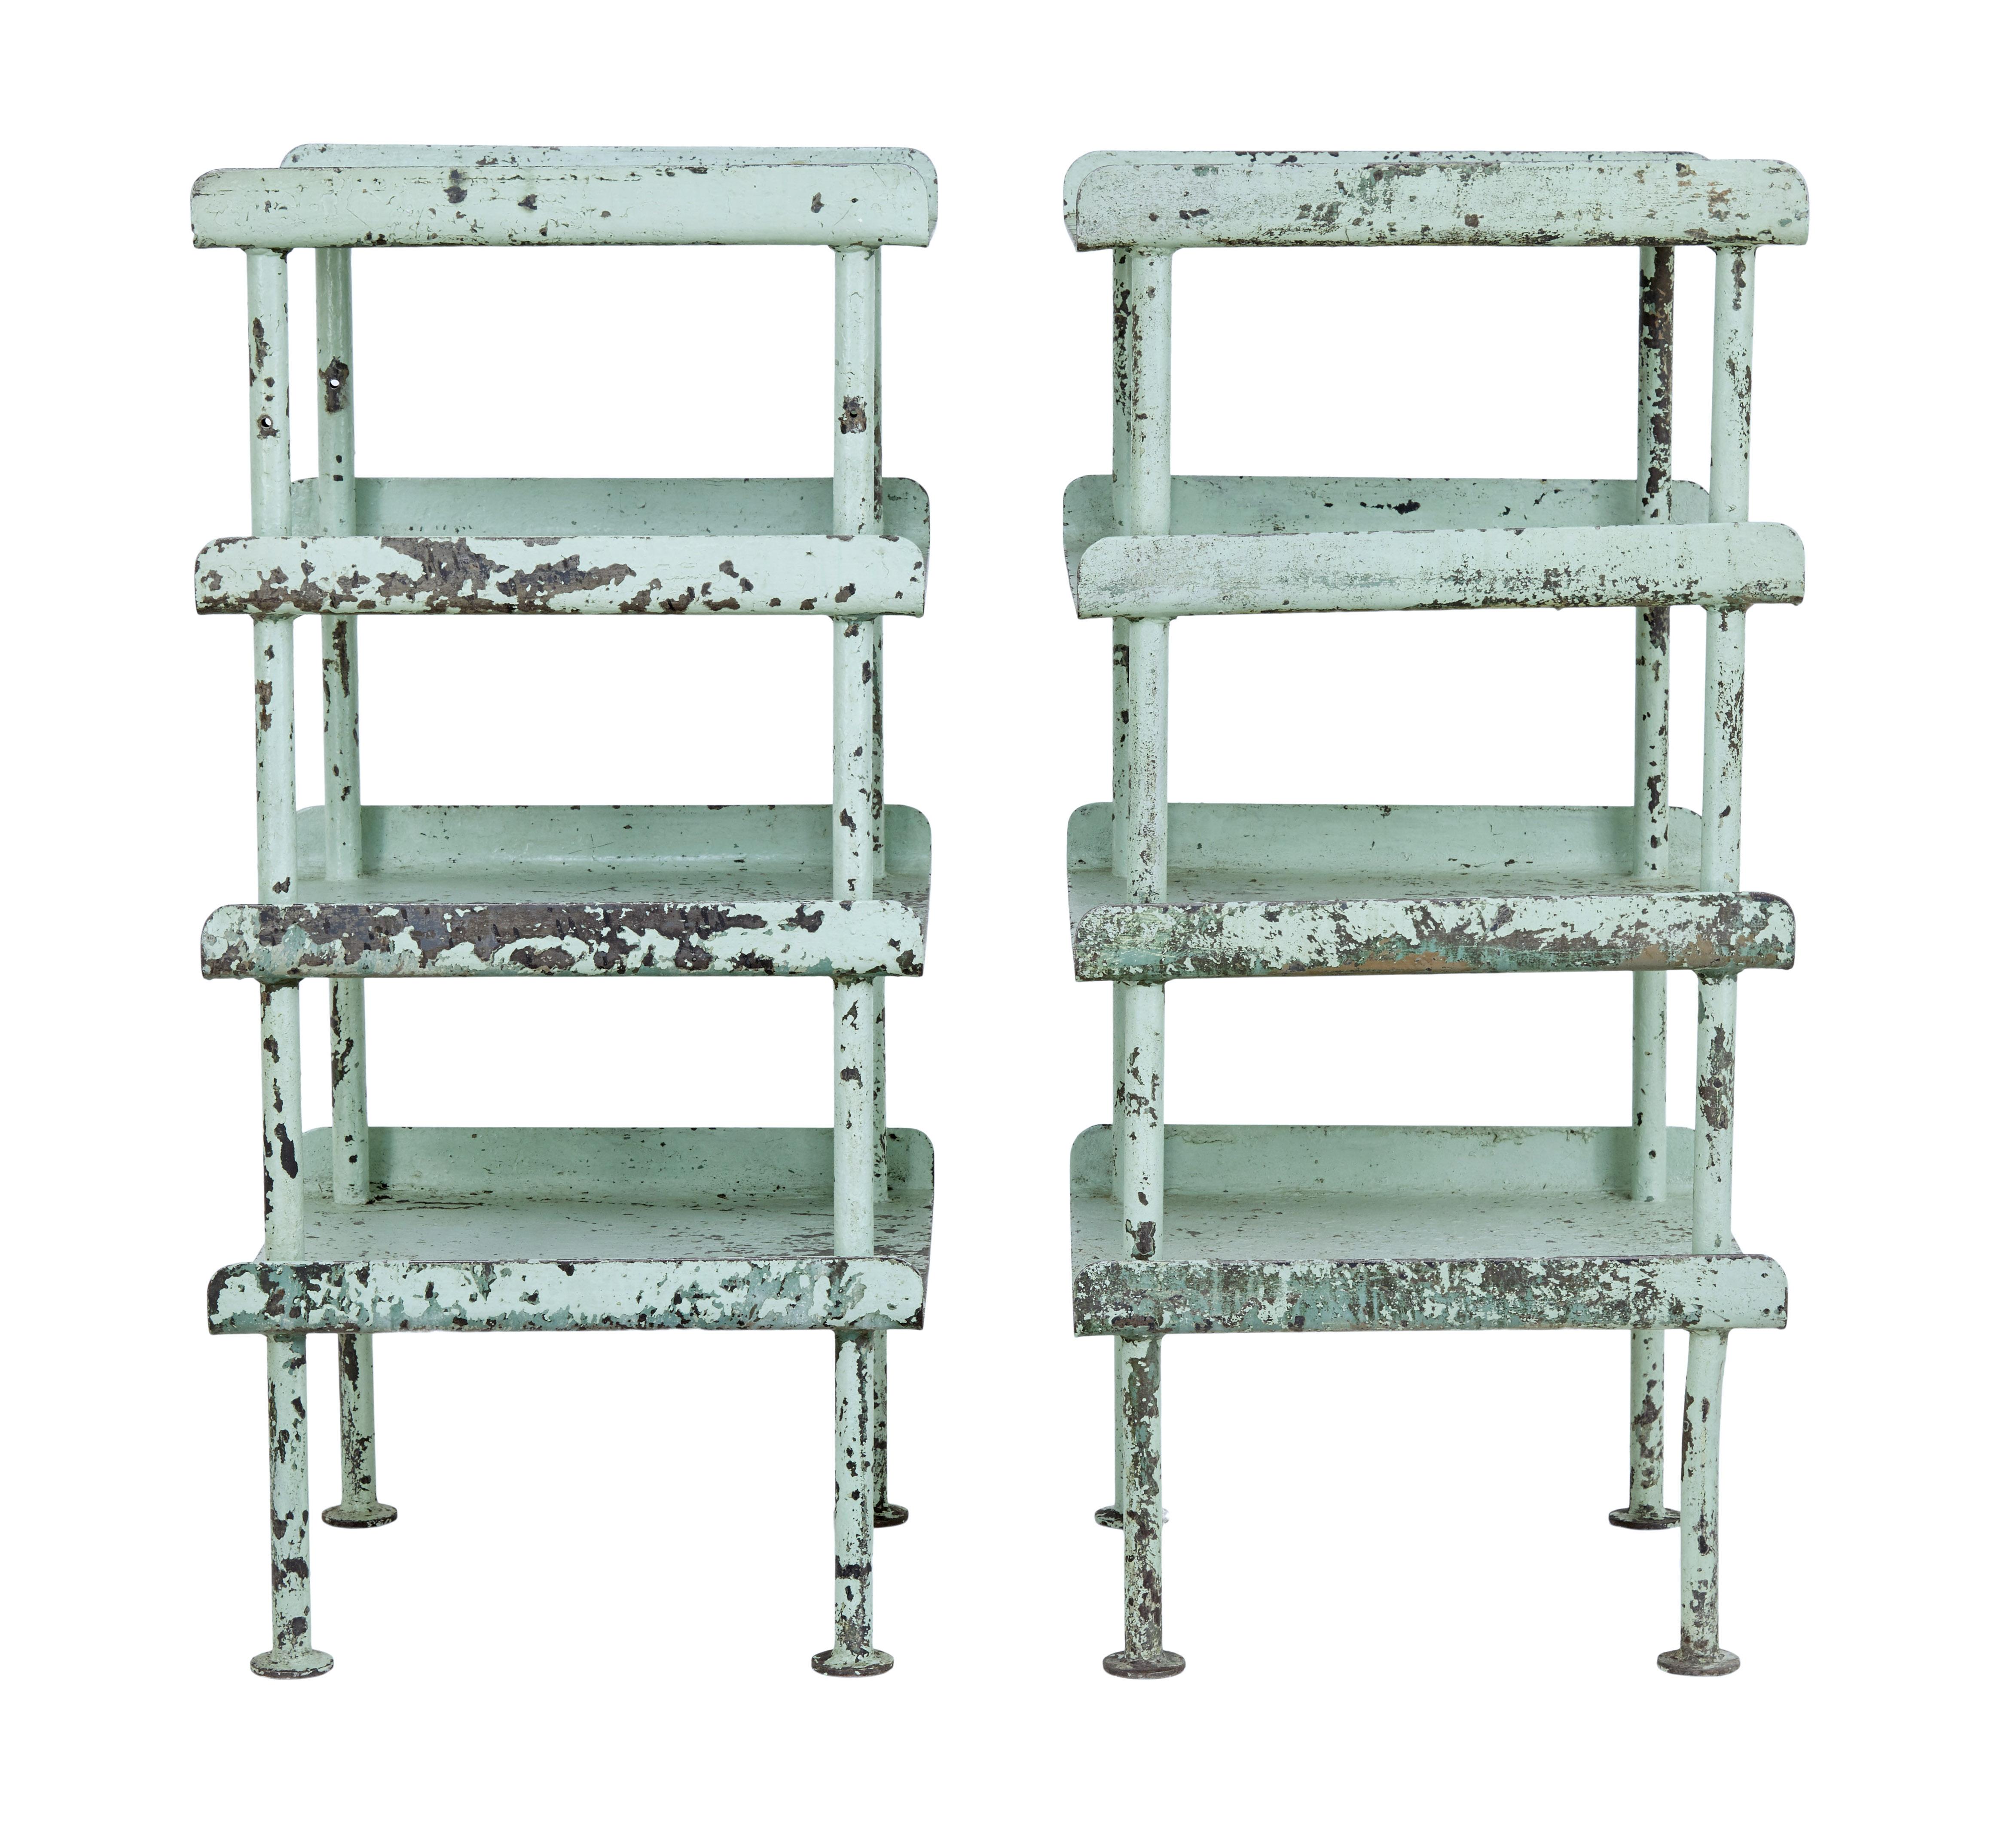 Pair of 1920s industrial steel storage stands, circa 1920.

Pair of 4-tier stands with curved edges to the sides, supported by tubular legs. Obvious losses to paint work and some bending with minor fractures.

Ideal for use in a garden room or